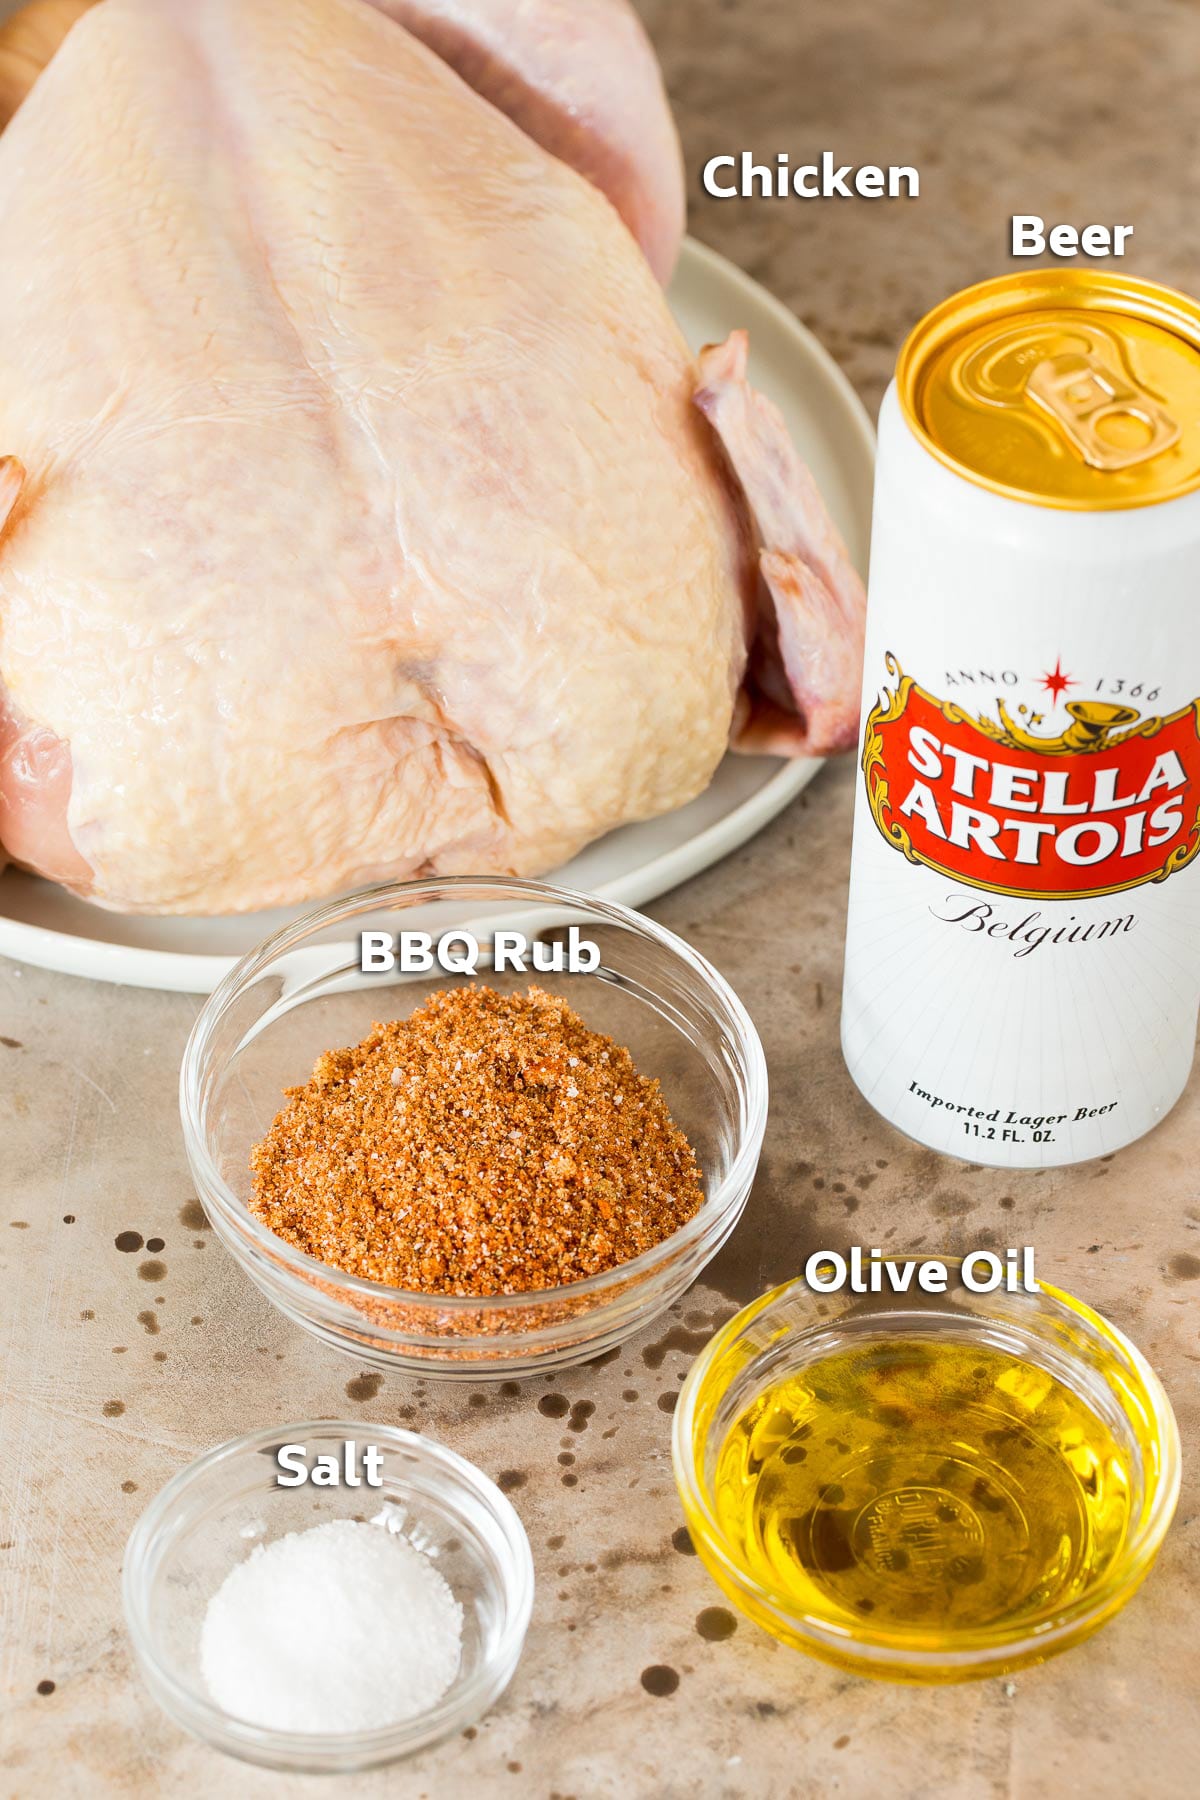 Ingredients such as chicken, olive oil, beer and spice rub.